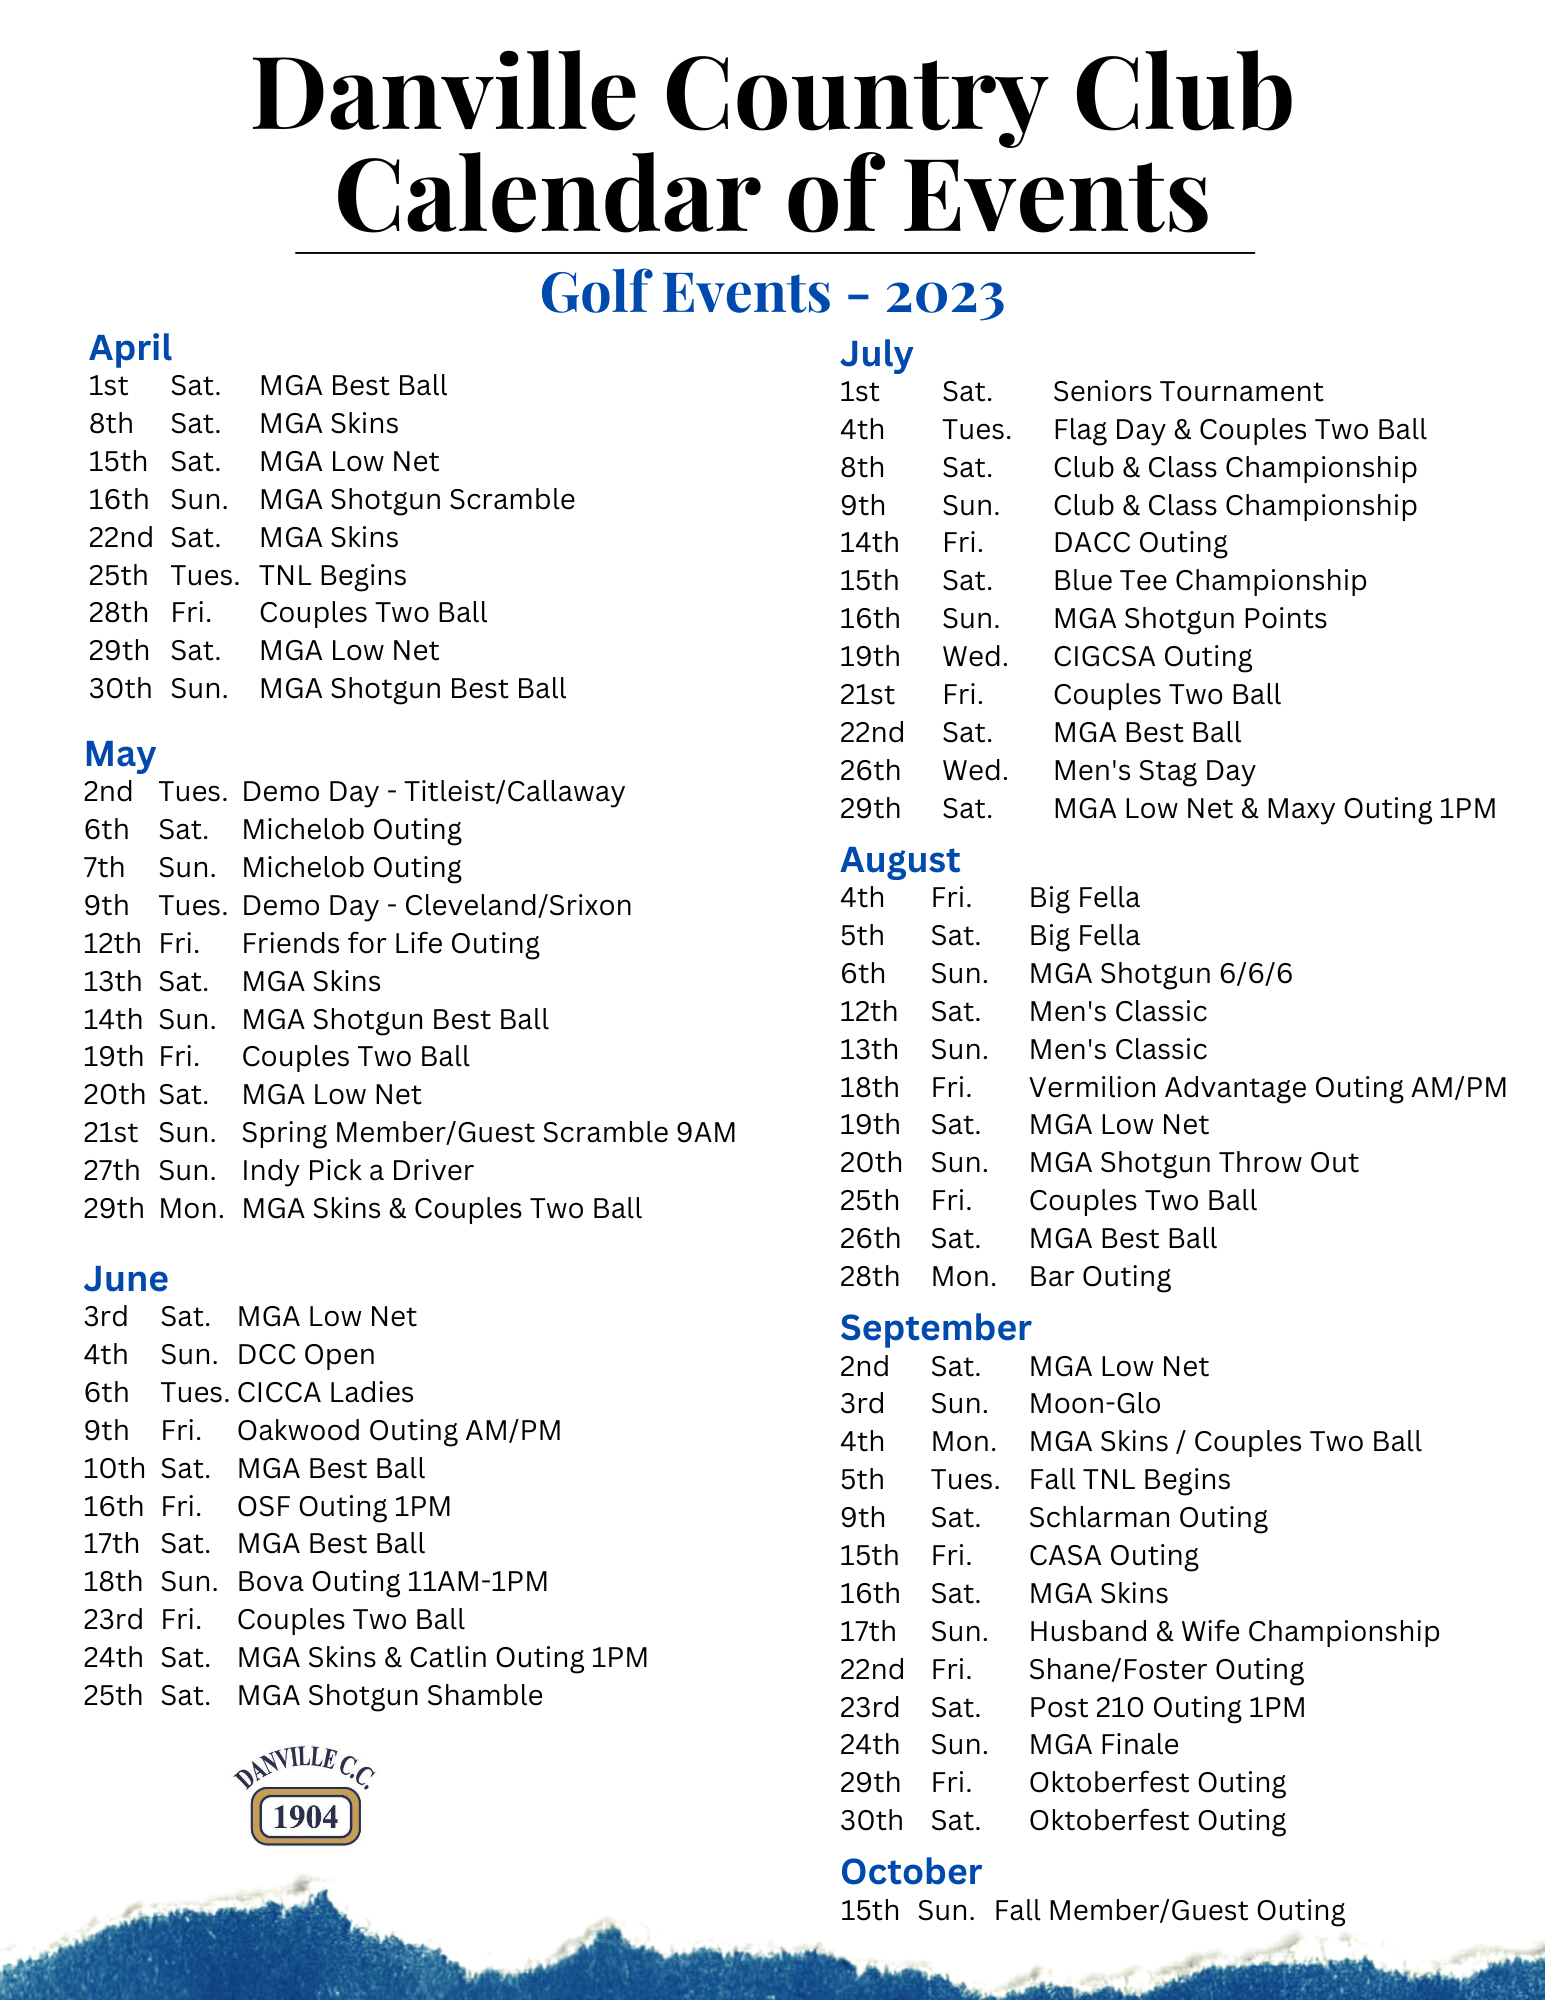 Calendar of Events Danville Country Club